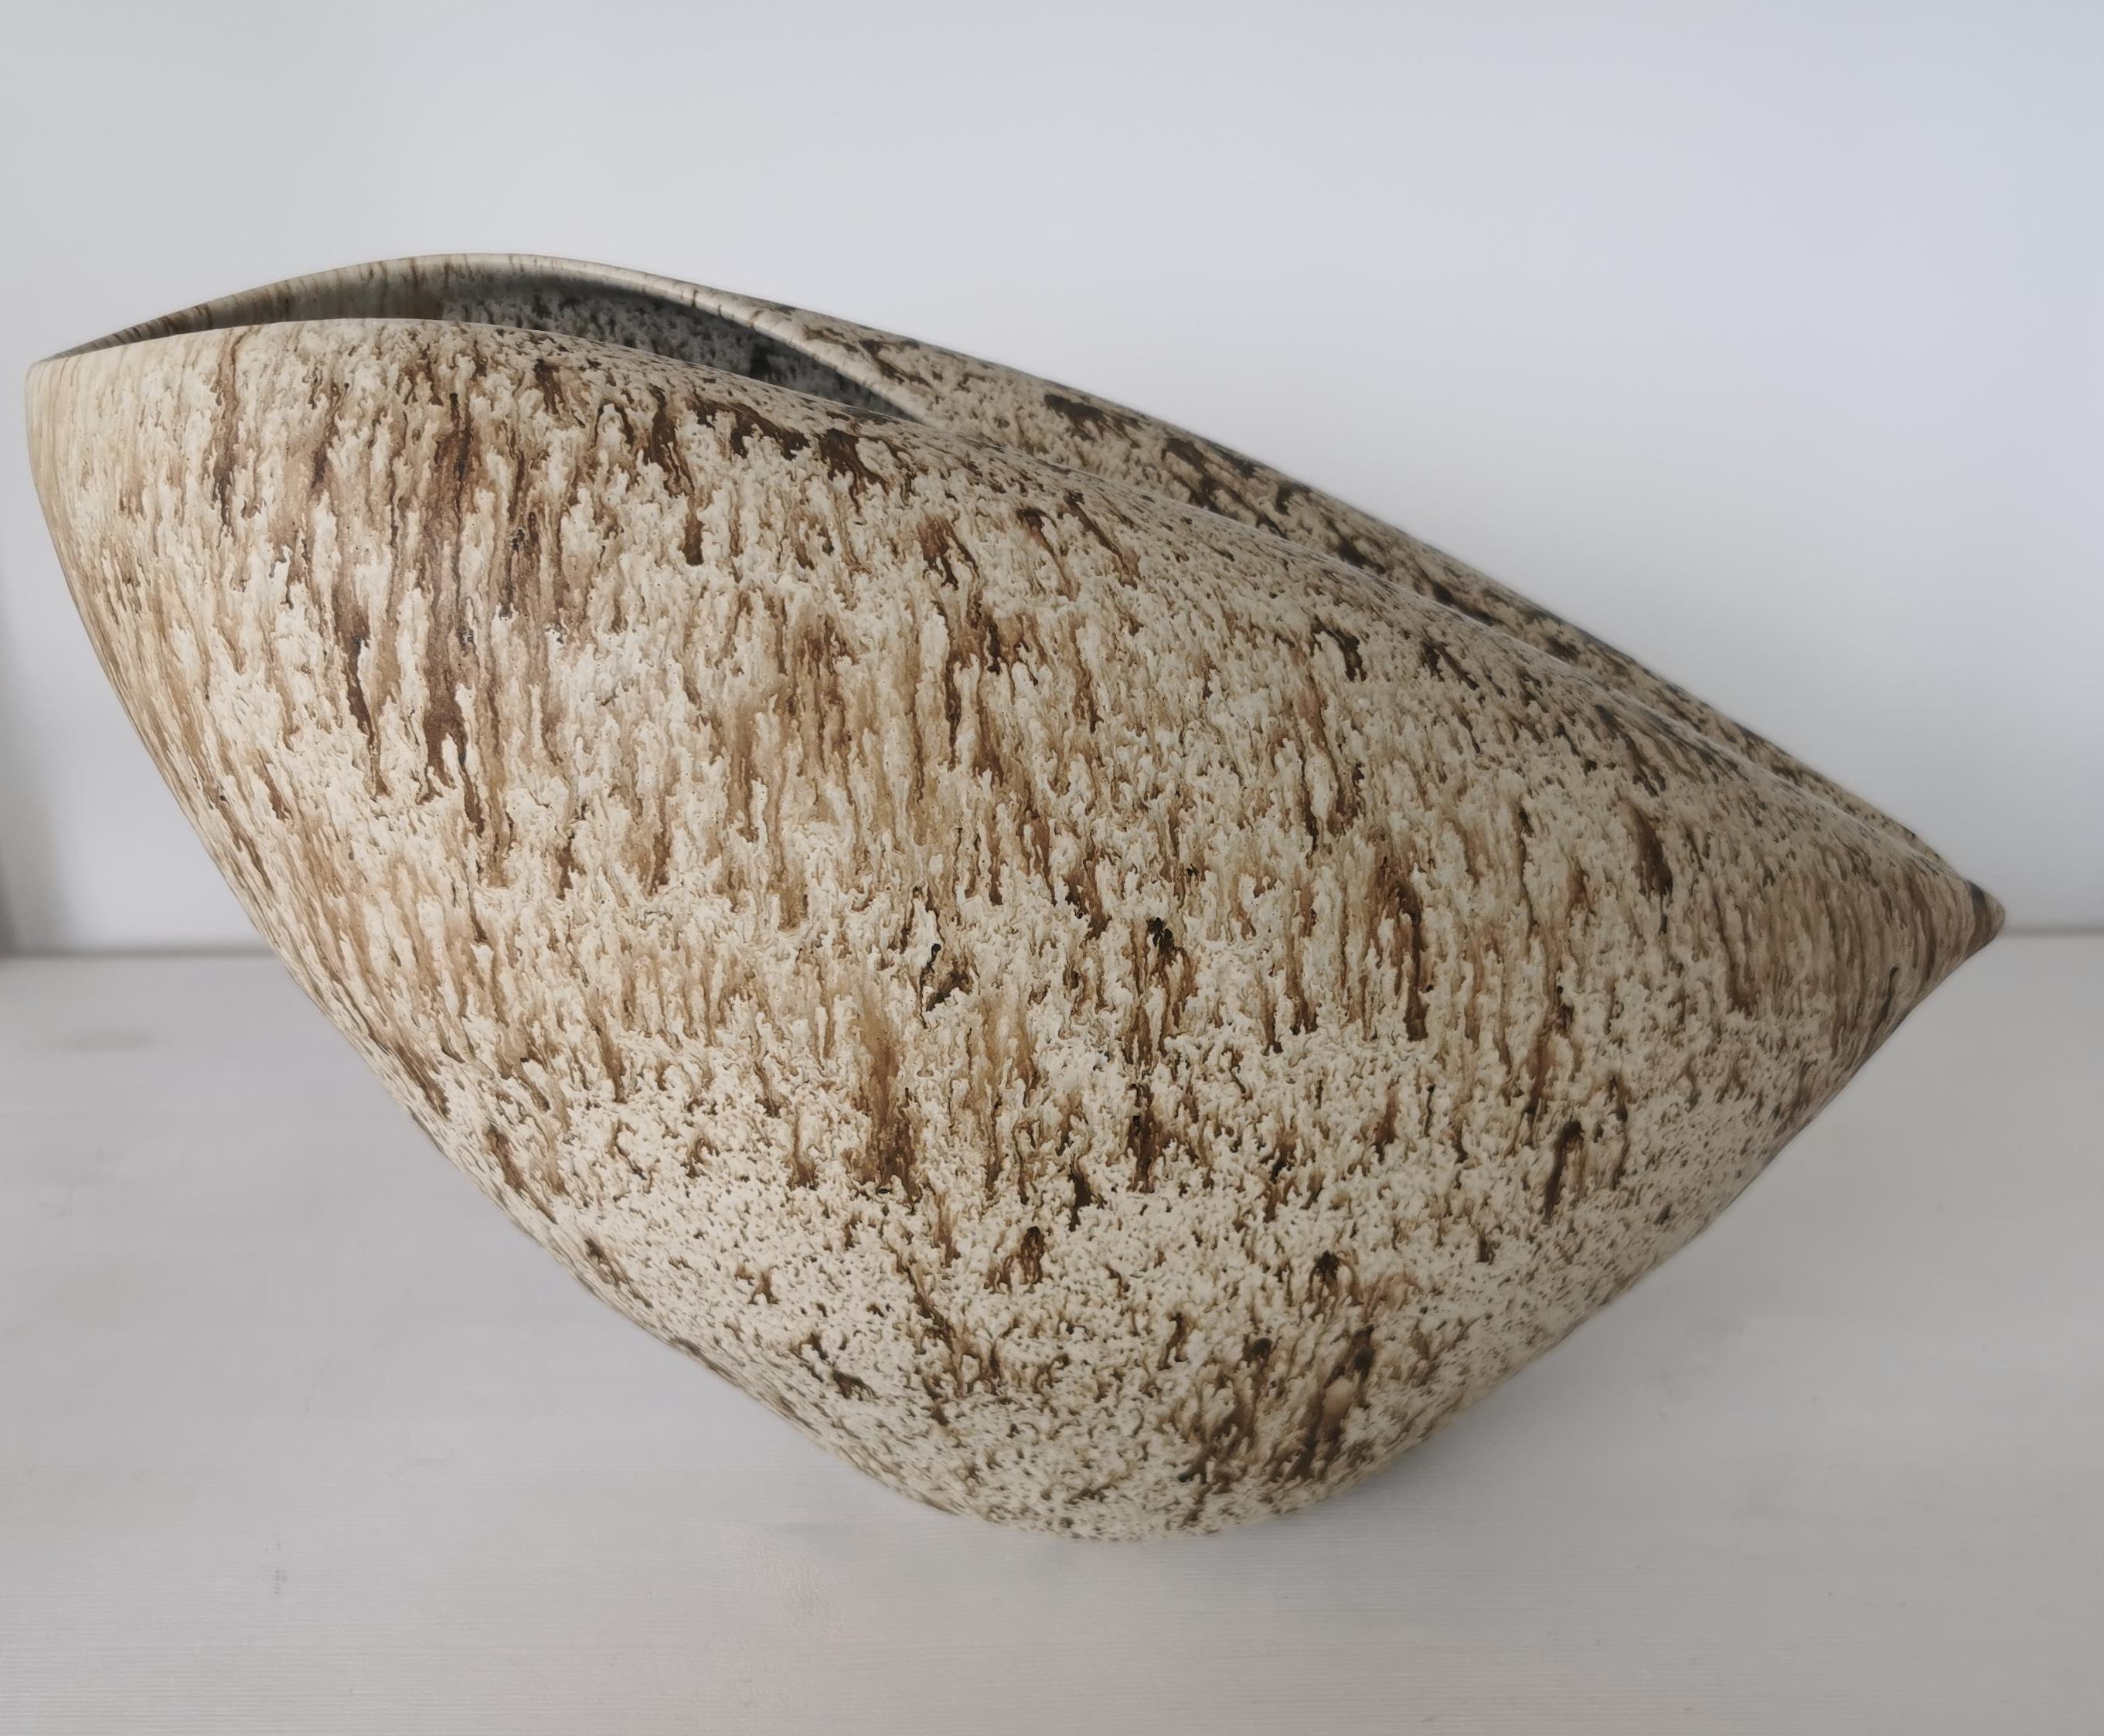 Organic Modern Oval Form with White and Brown Speckled Glaze, Vessel No.99, Ceramic Sculpture For Sale